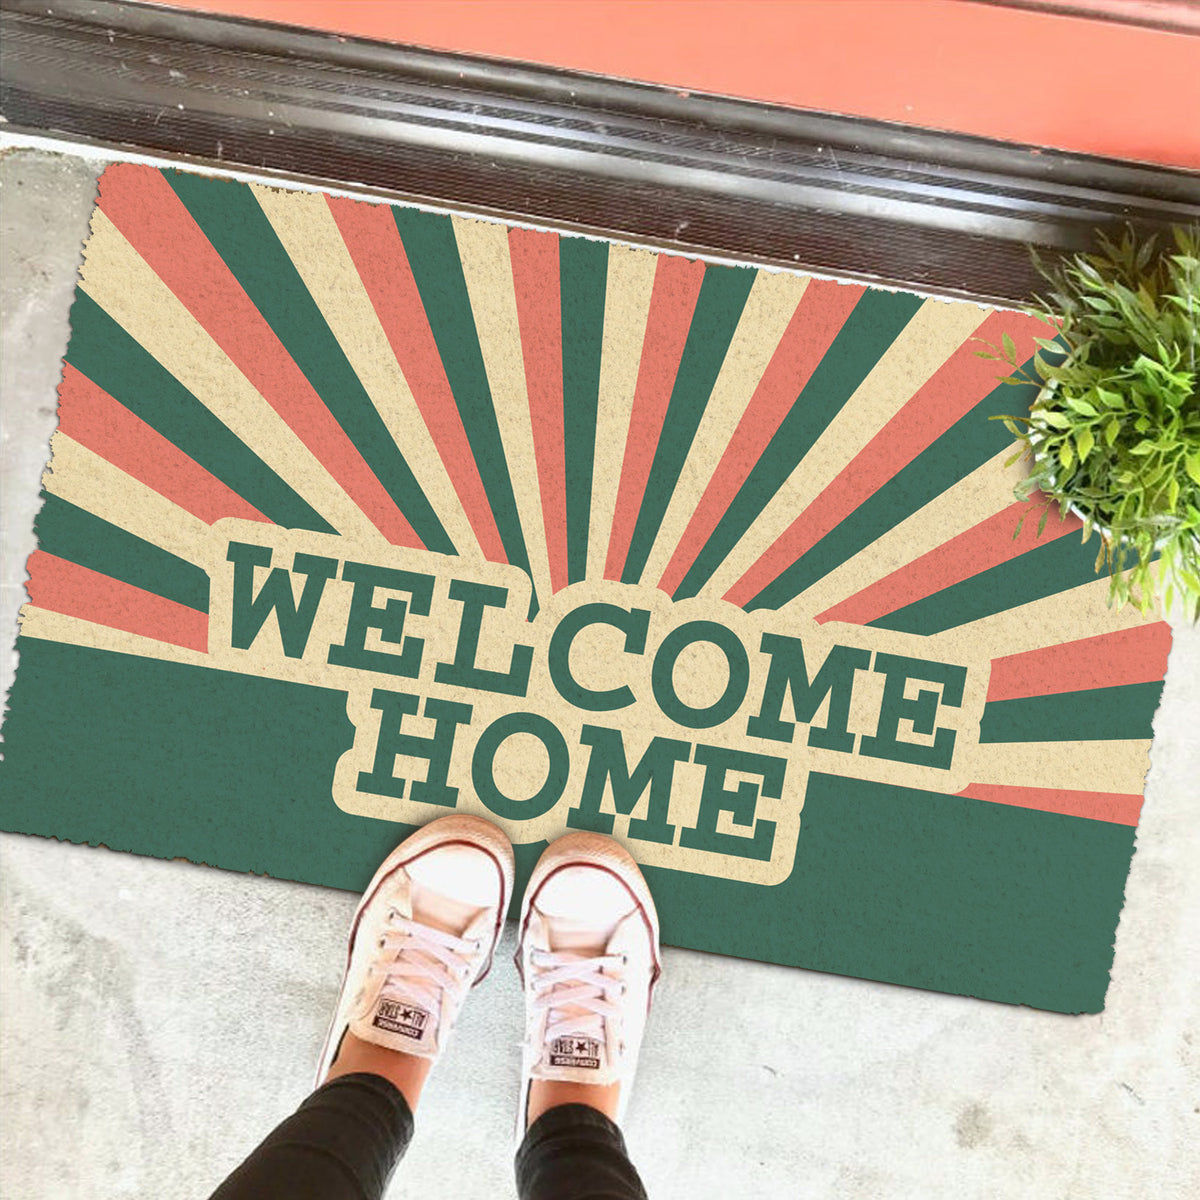 OnlyMat Retro WELCOME HOME Printed Natural Coir Entrance Mat